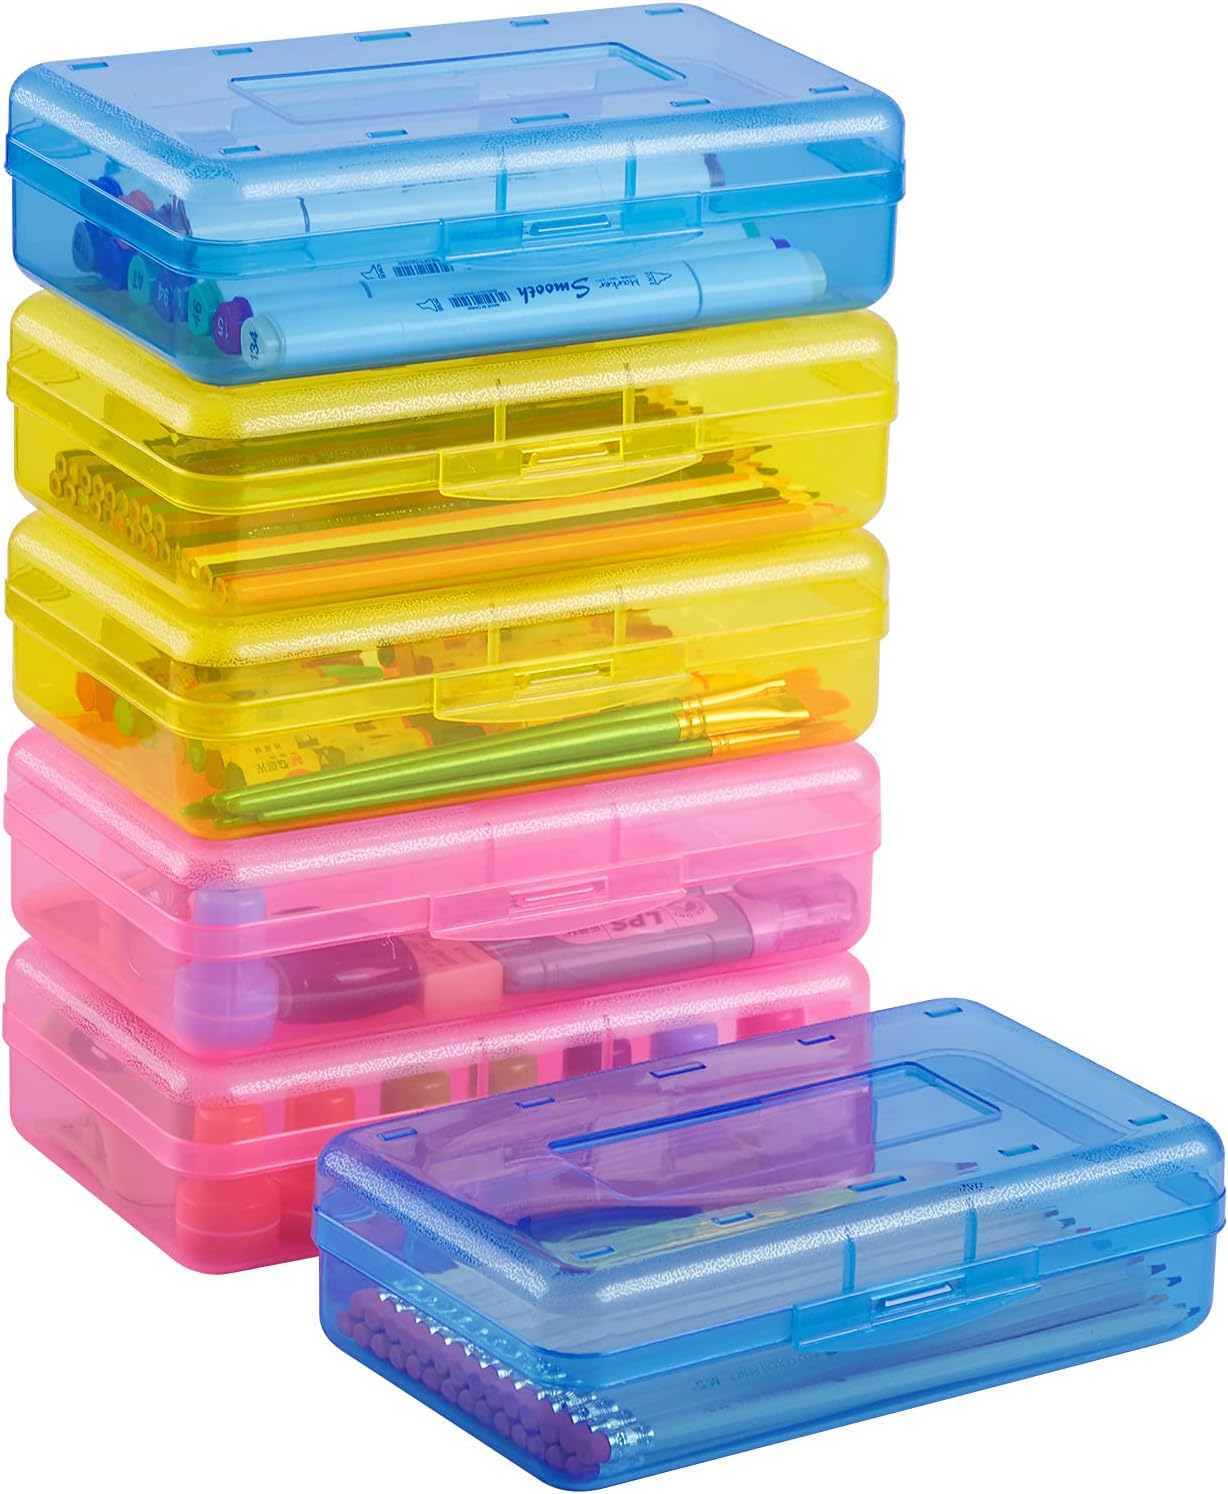 Sooez 6 Pack Pencil Box, Plastic Large Capacity Pencil Boxes Plastic Boxes with Snap-tight Lid, School Supply Box Stackable Design and Stylish Colors in Pink, Yellow and Blue